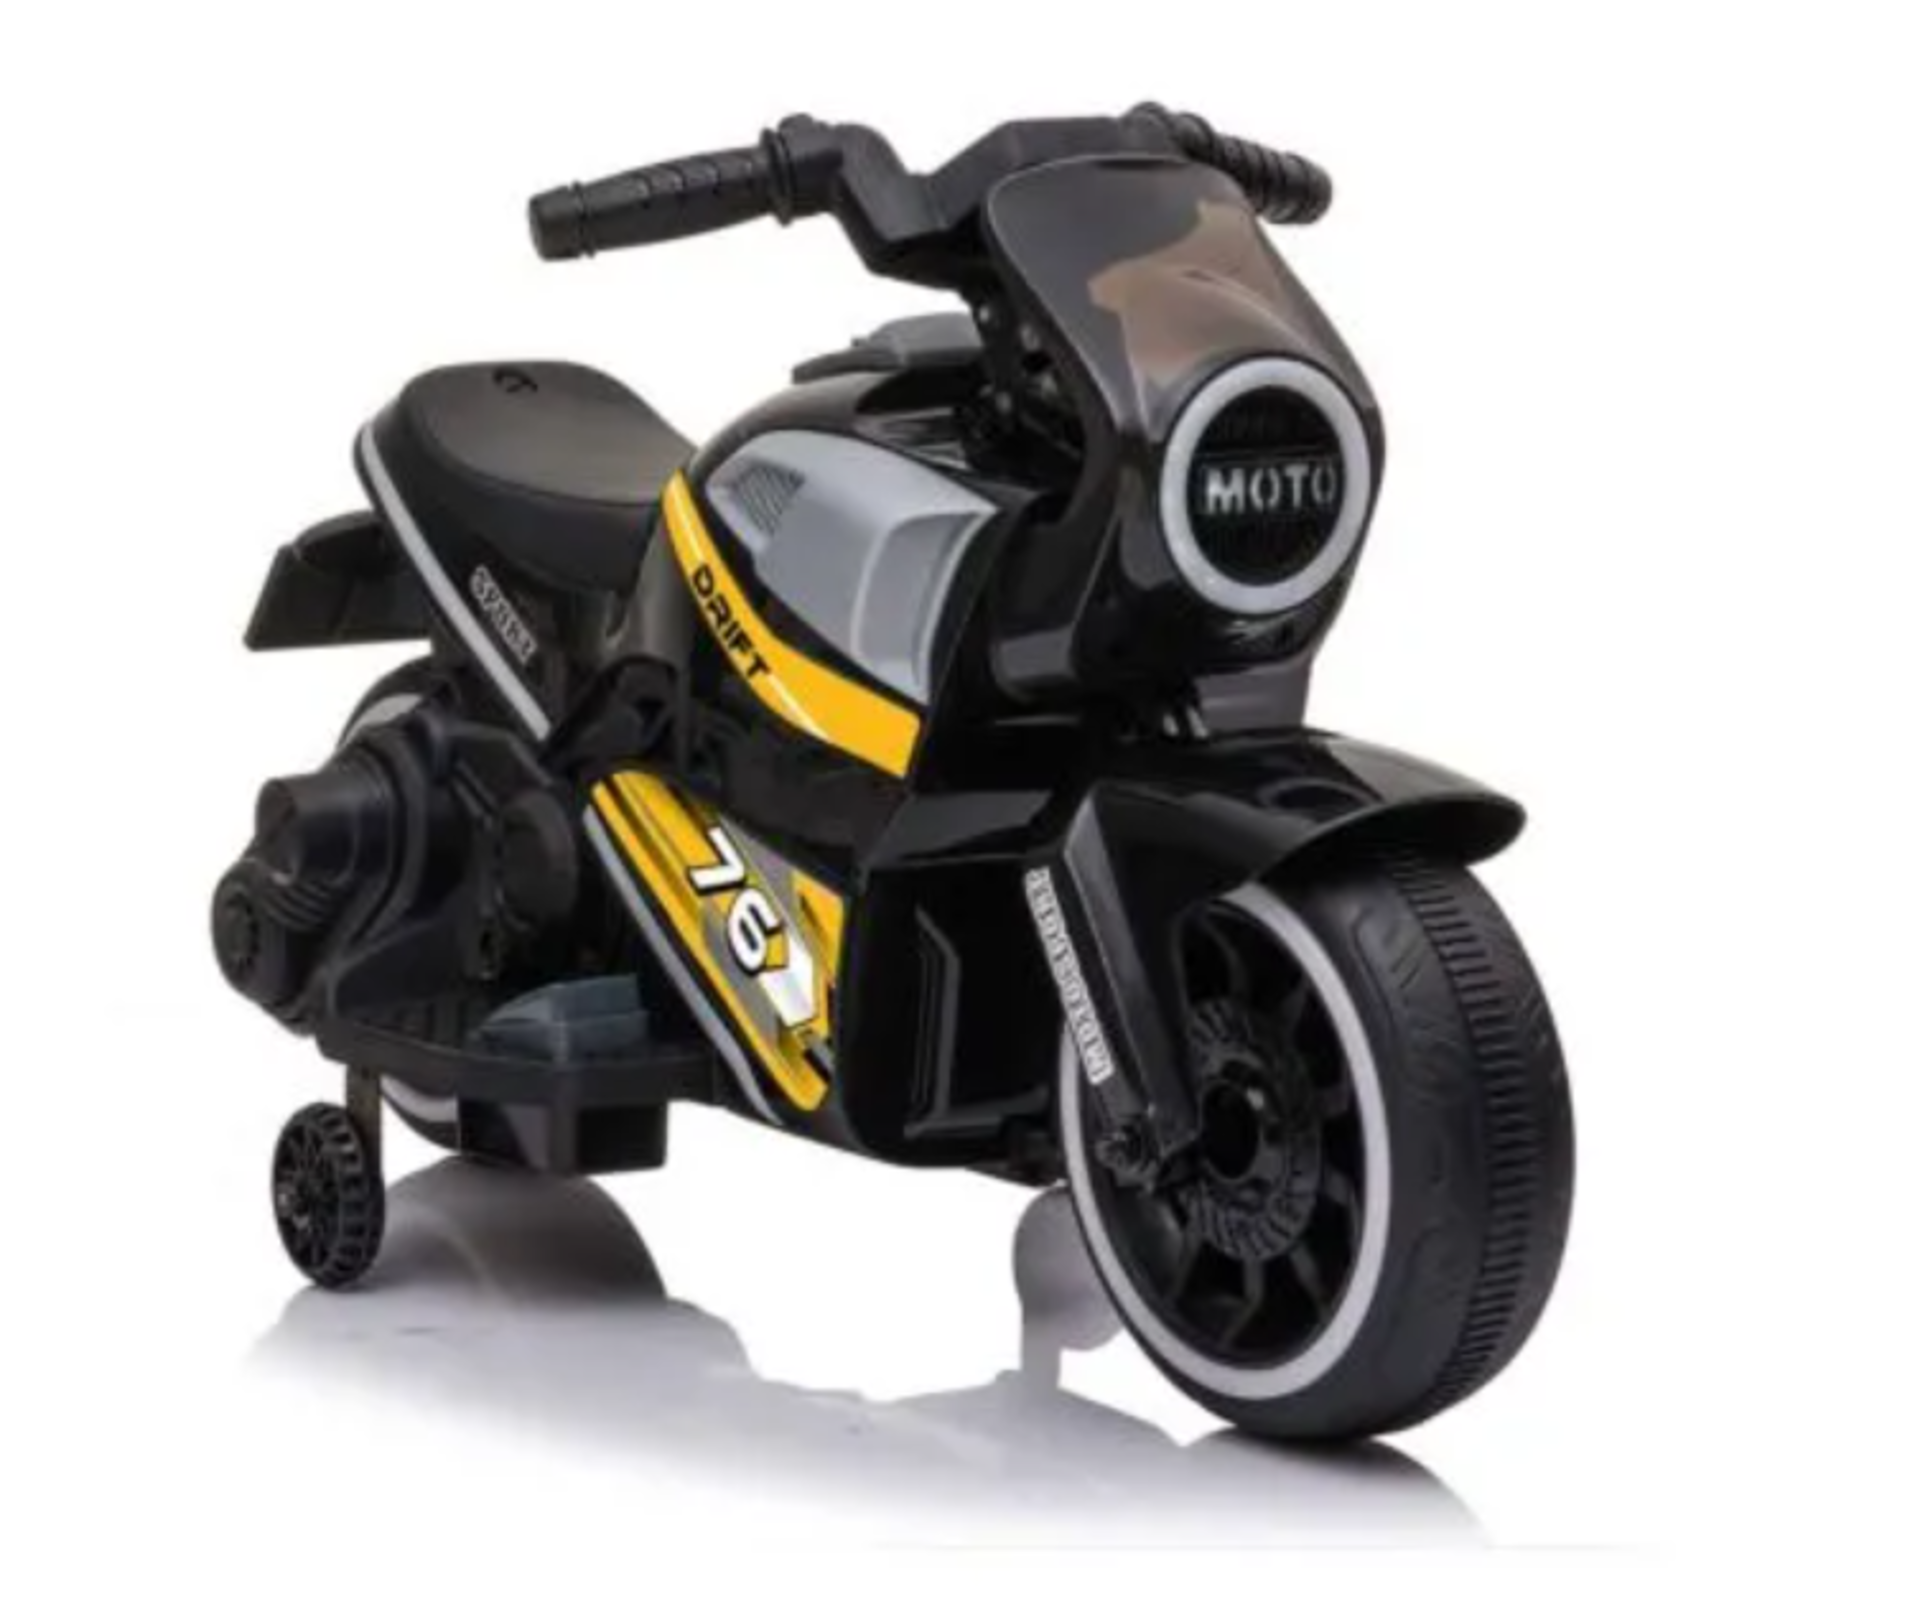 Electric Ride On Motorbike - Black. - SR28. RRP £159.99. Ride on with this nippy Electric